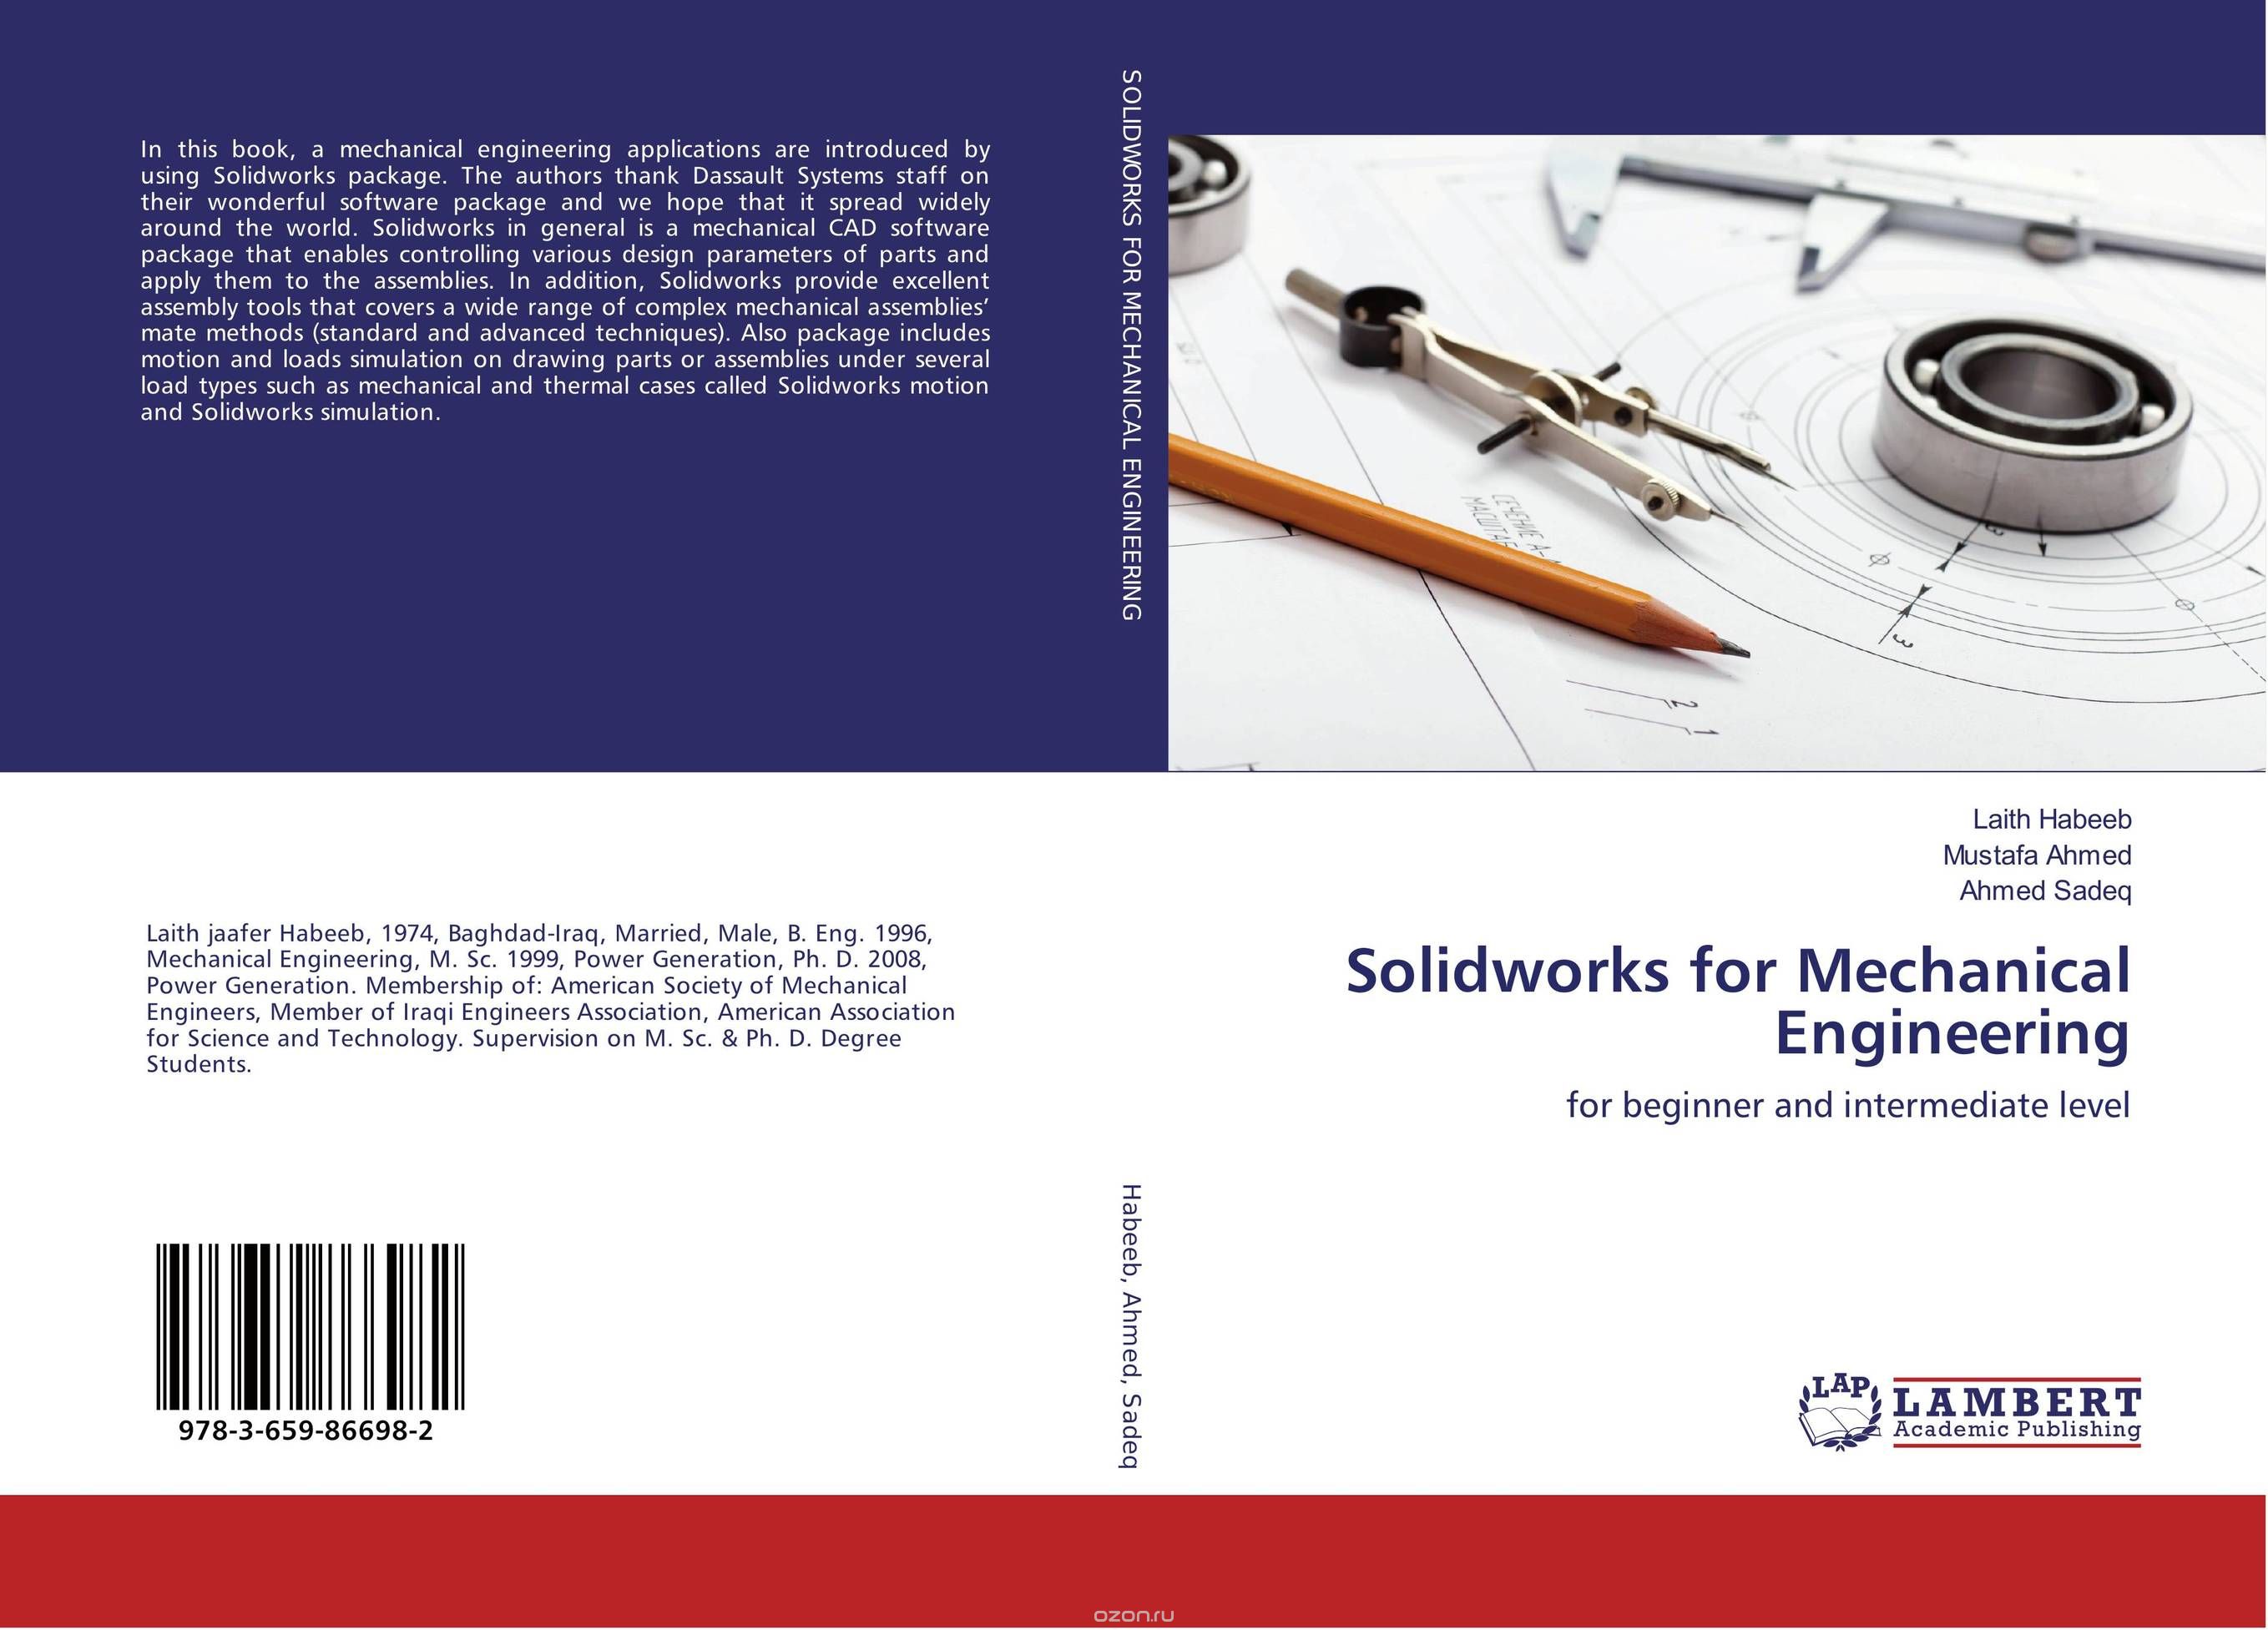 Solidworks for Mechanical Engineering